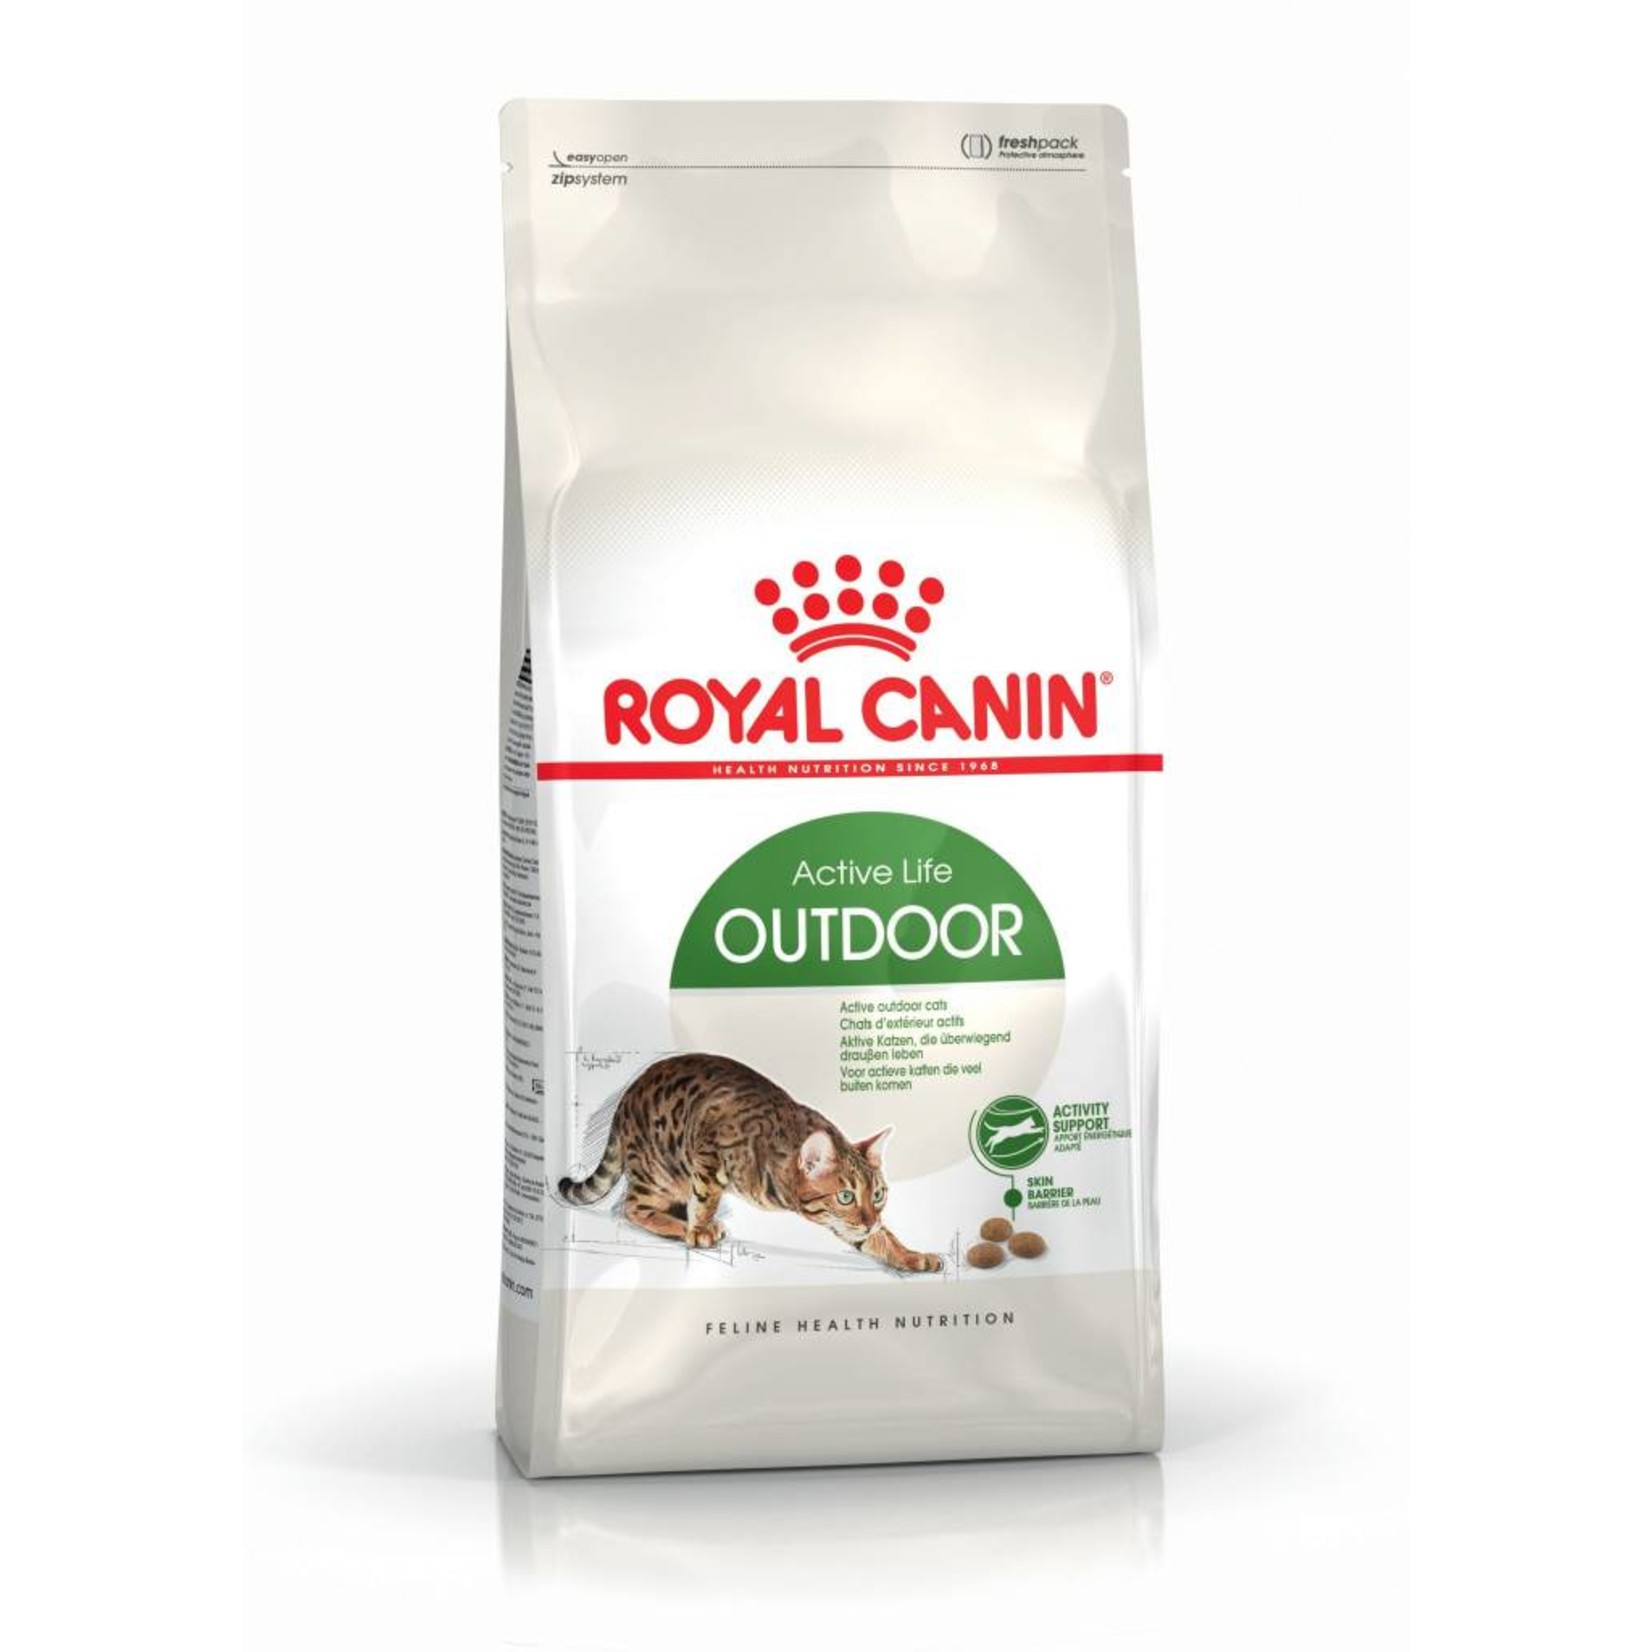 Royal Canin Active Life Outdoor Cat Food